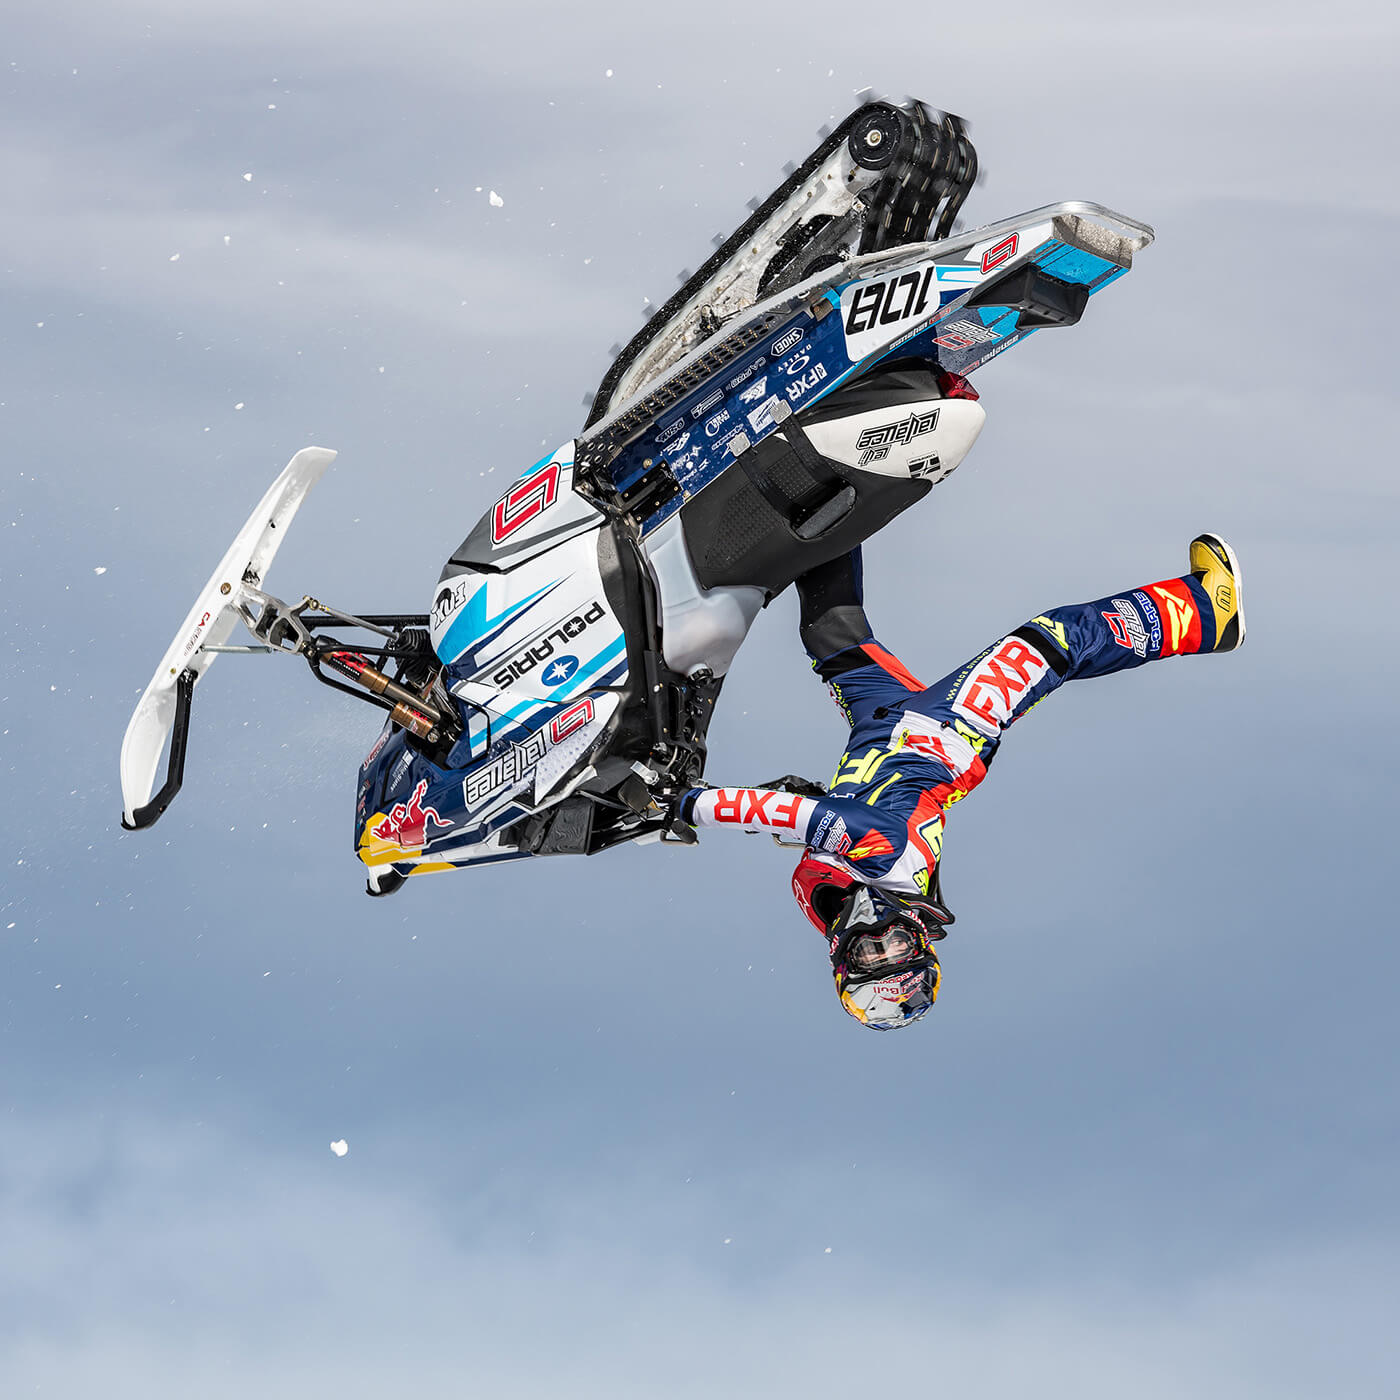 Levi LaVallee midair with white C&A Pro skis with black handles